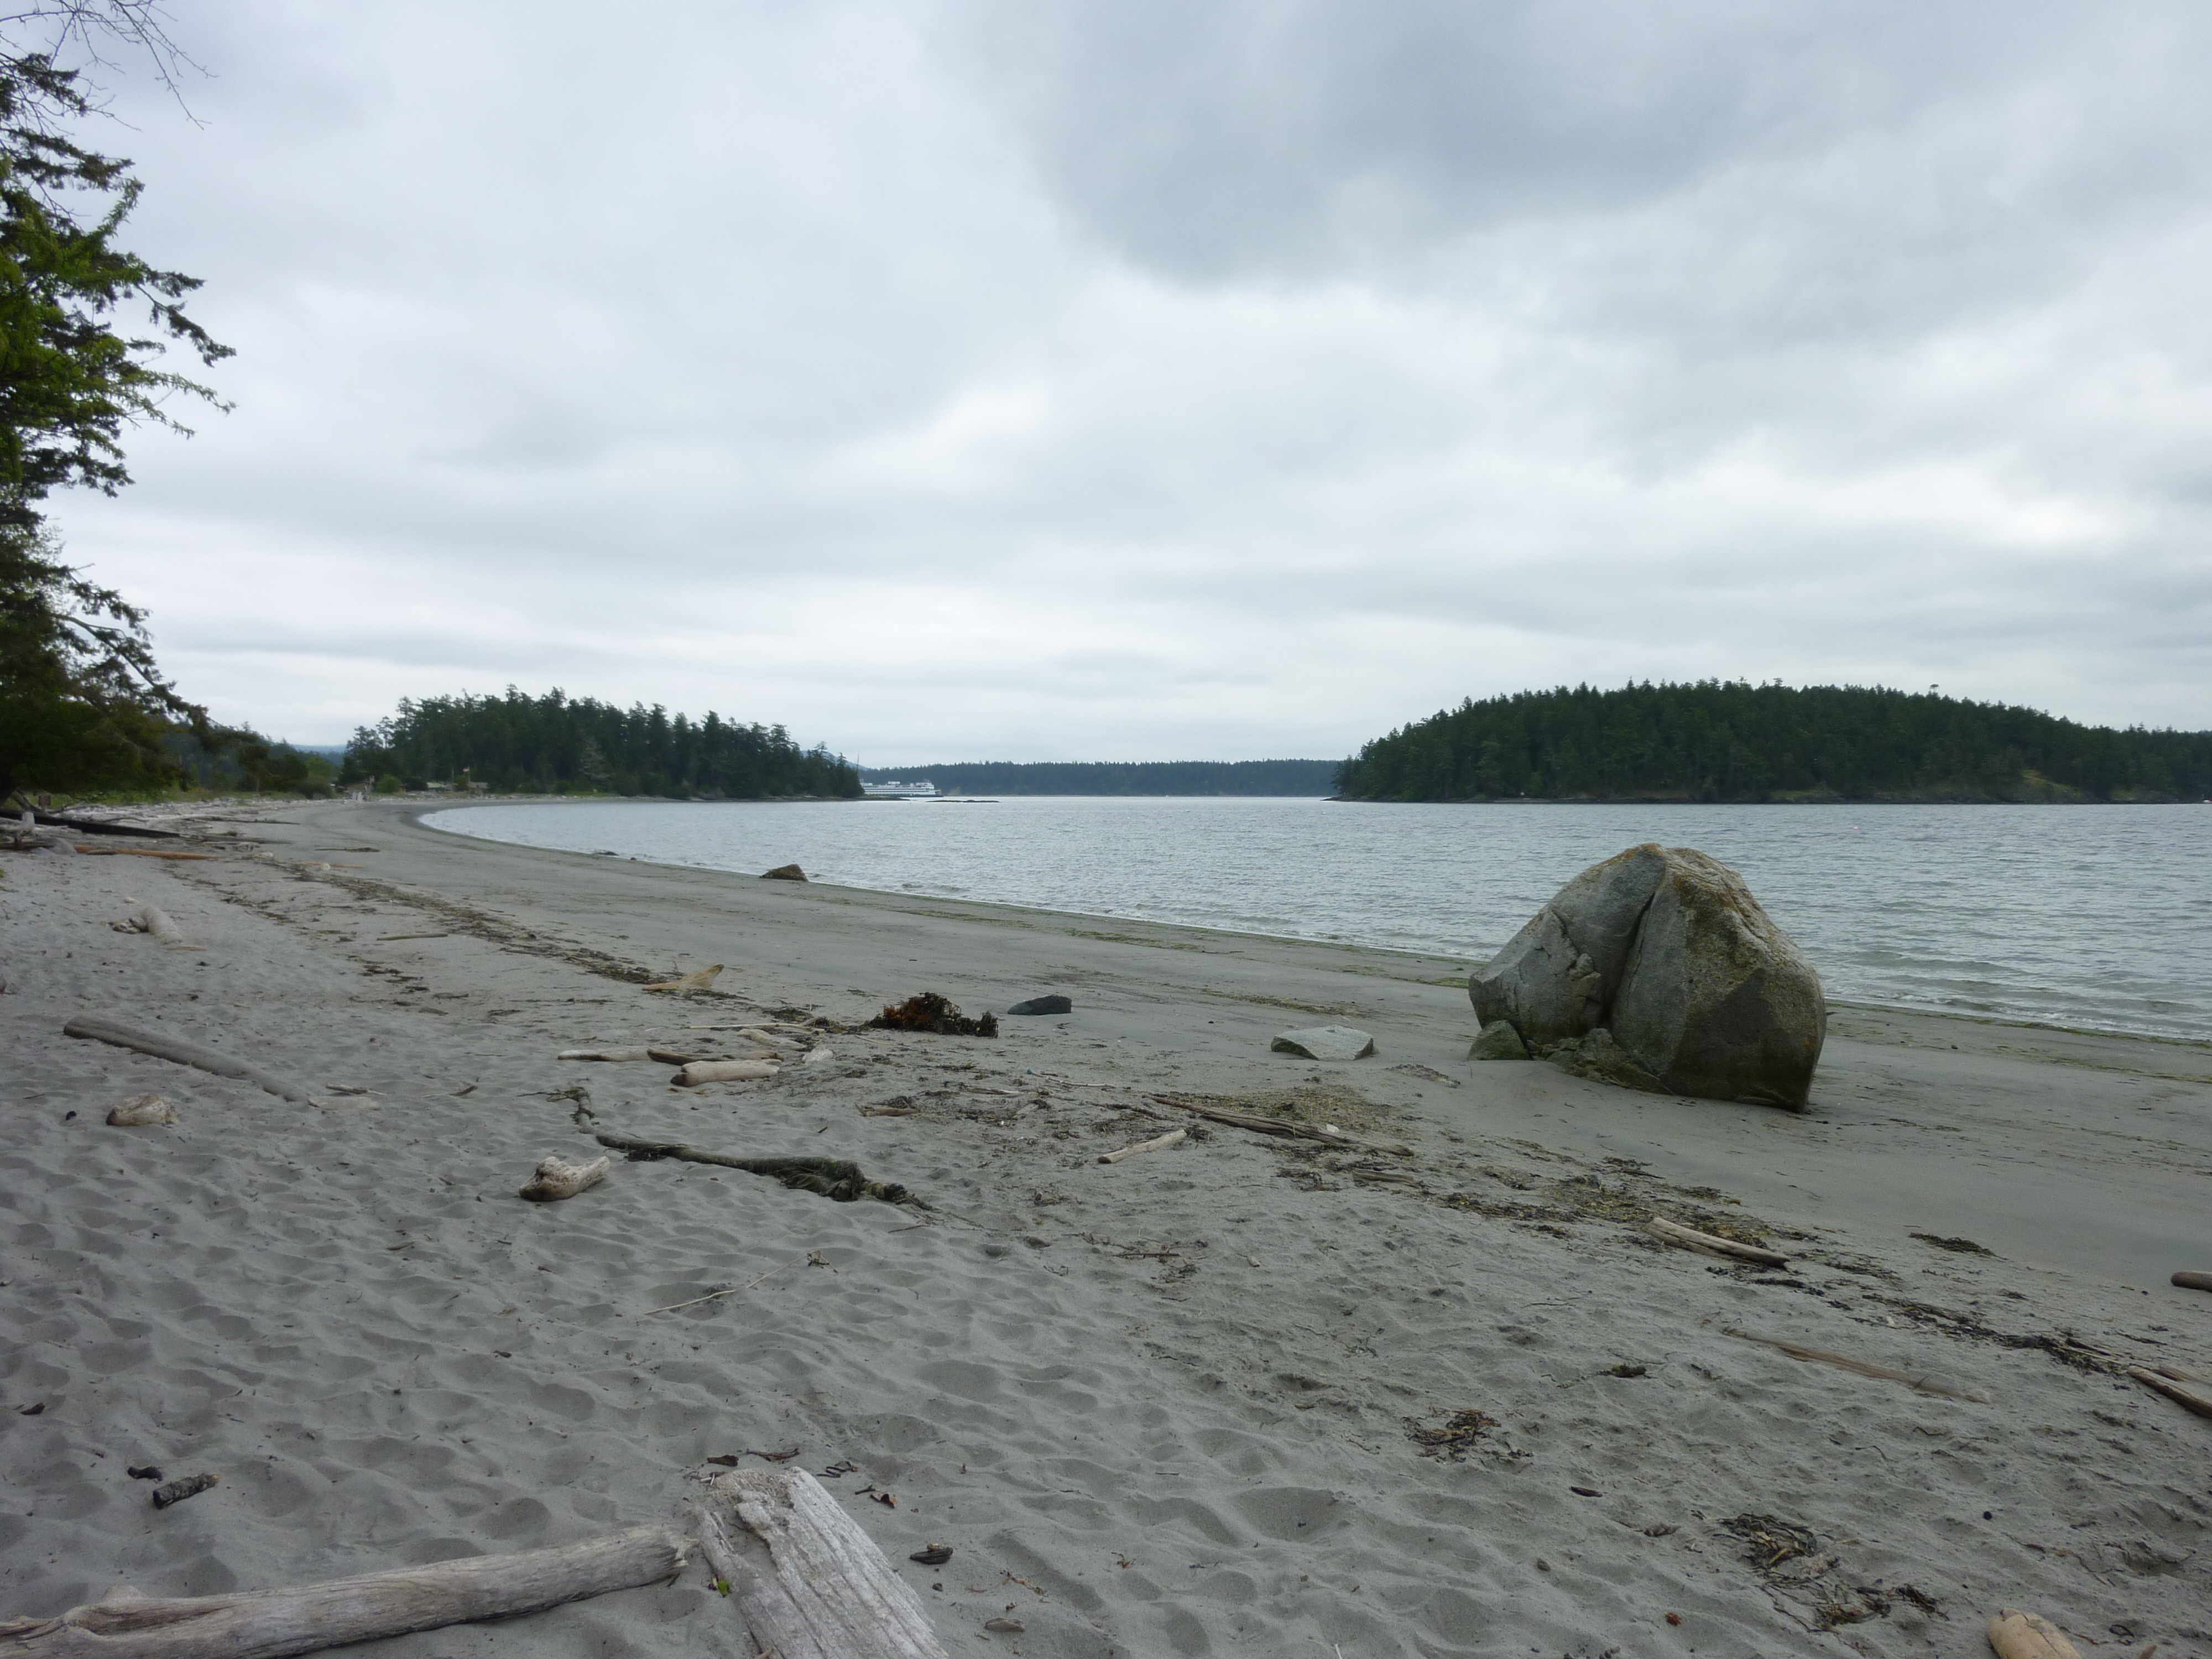 This gorgeous sandy beach is part of 60-acre Shaw Island County Park, one of the nicest in the San Juans.